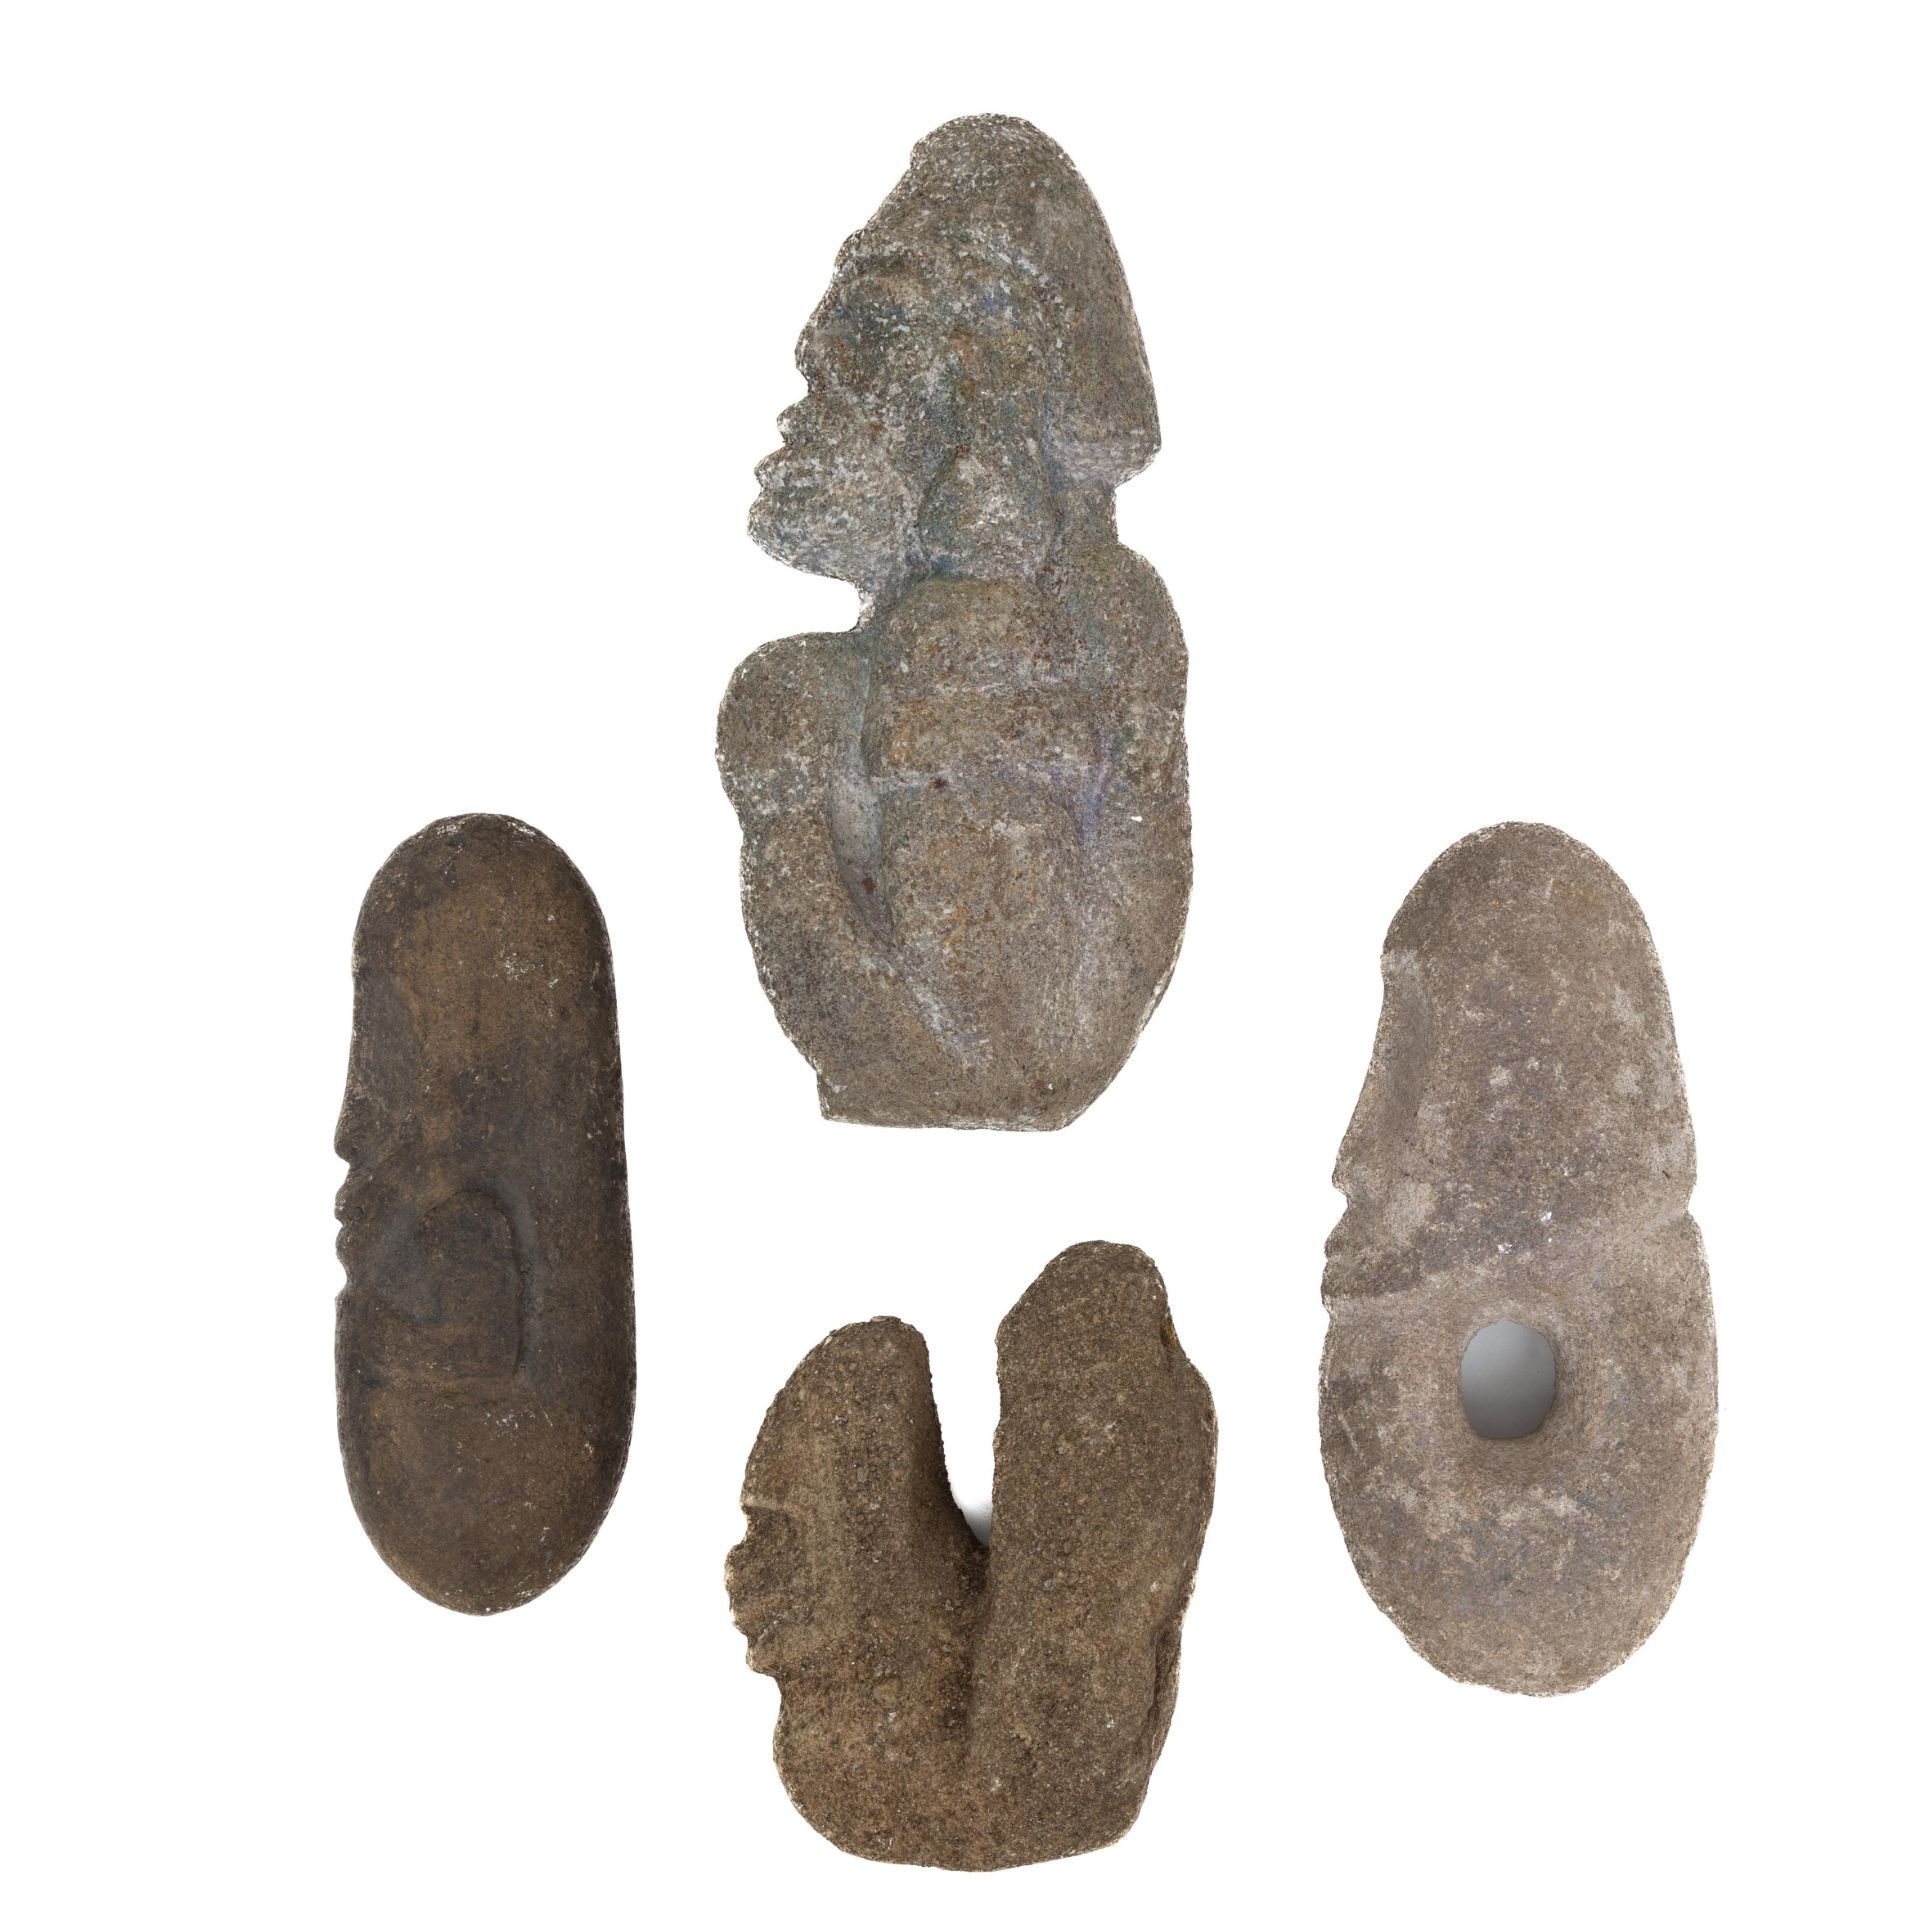 Solomon Islands four carved stone objects.